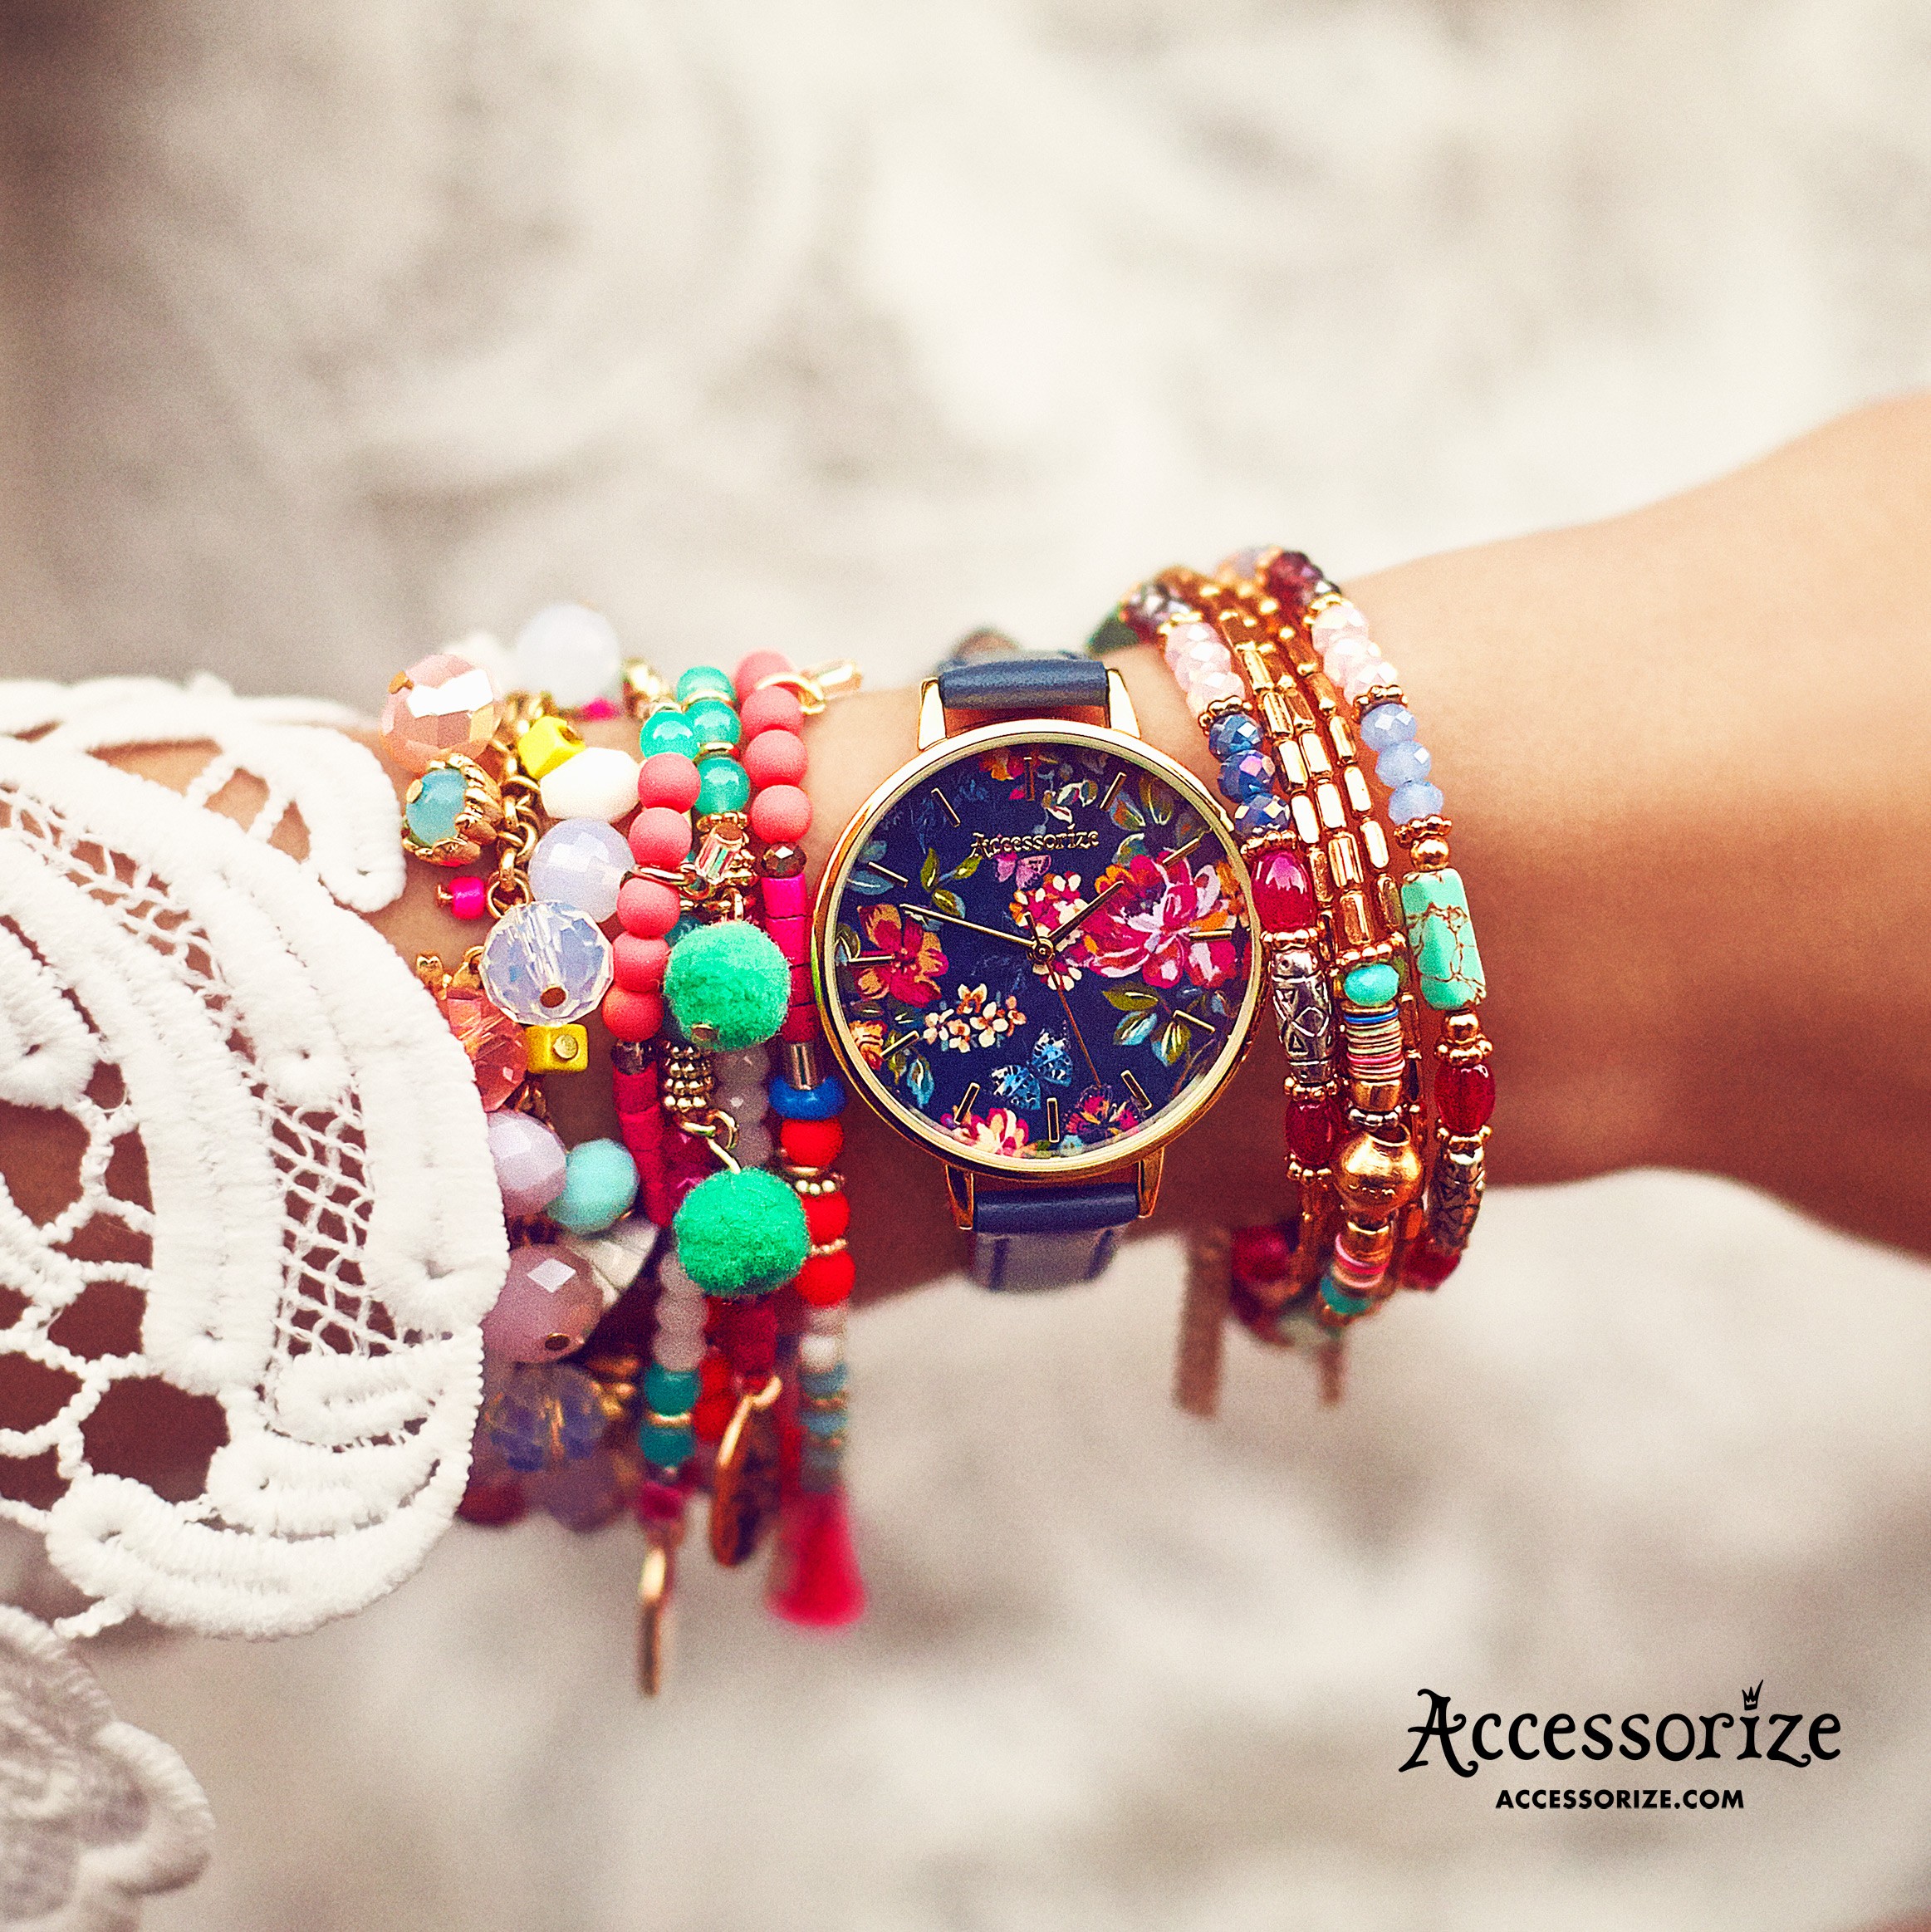 accessorize-campaign-shoes-still-life-watches-sunshine-summer-ruth-rose-6.jpg